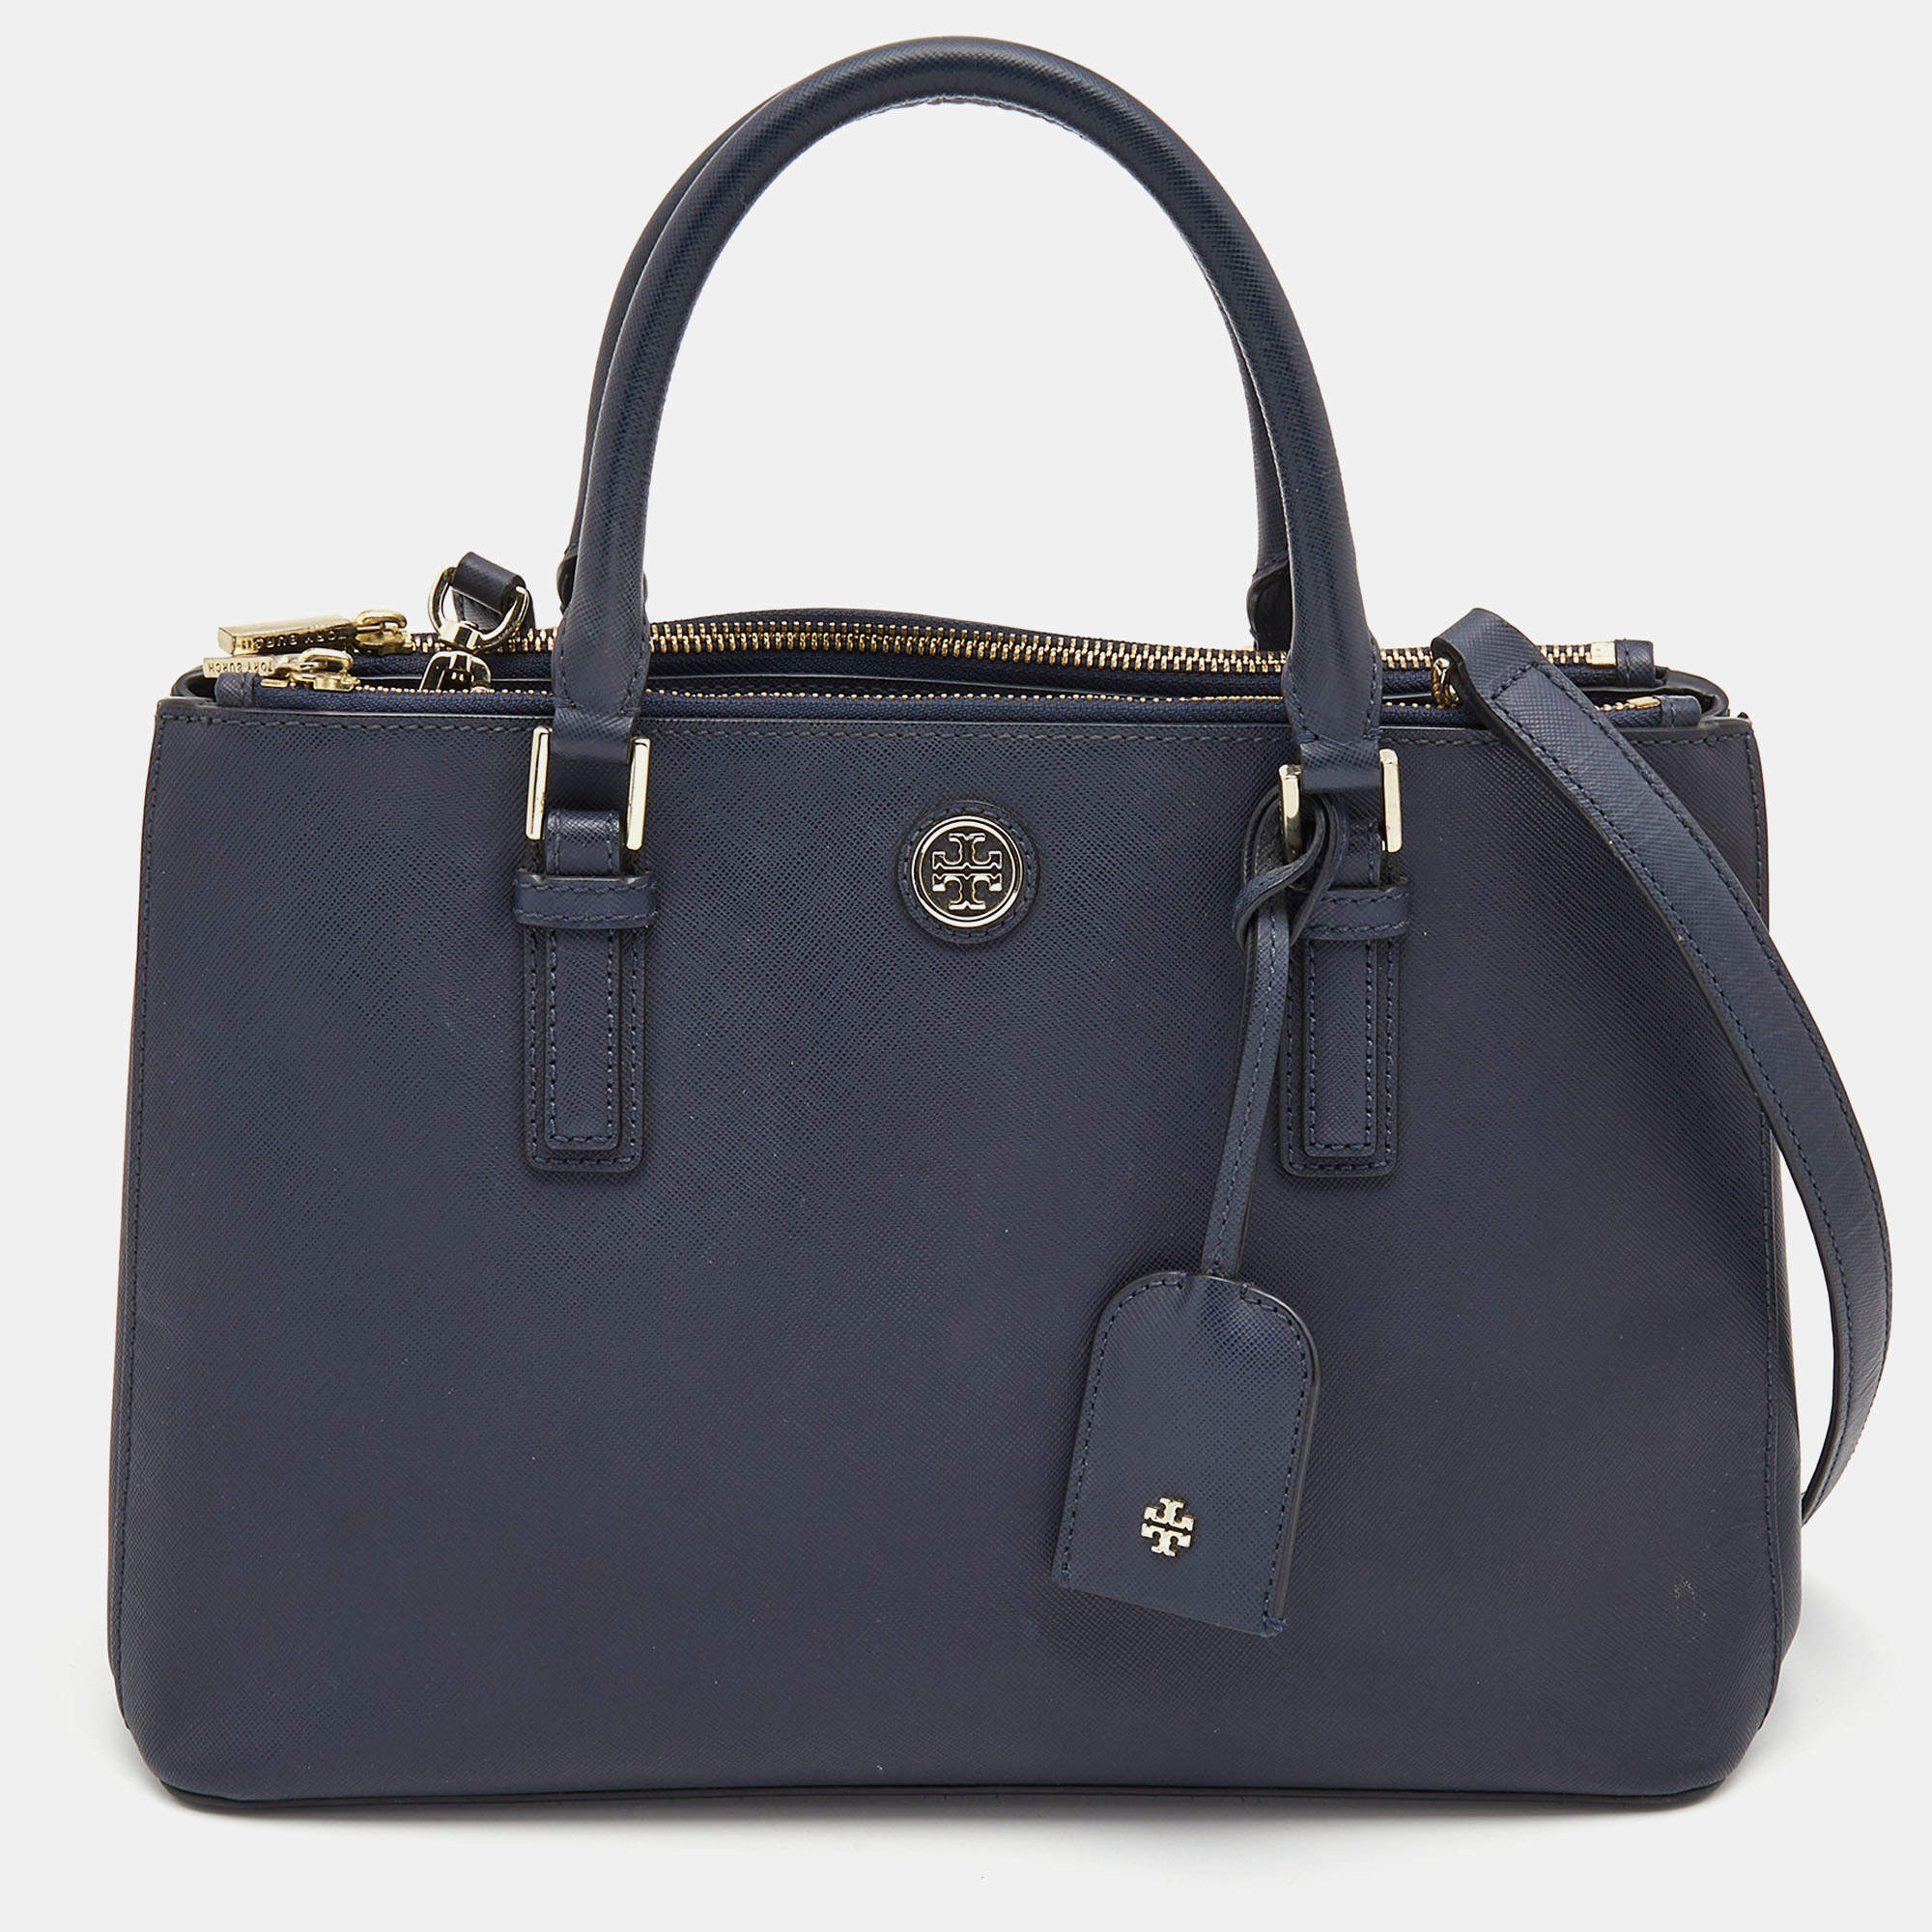 Tory Burch Saffiano Leather Robinson Double Zip Tote Bag - Neutrals Totes,  Handbags - WTO583966